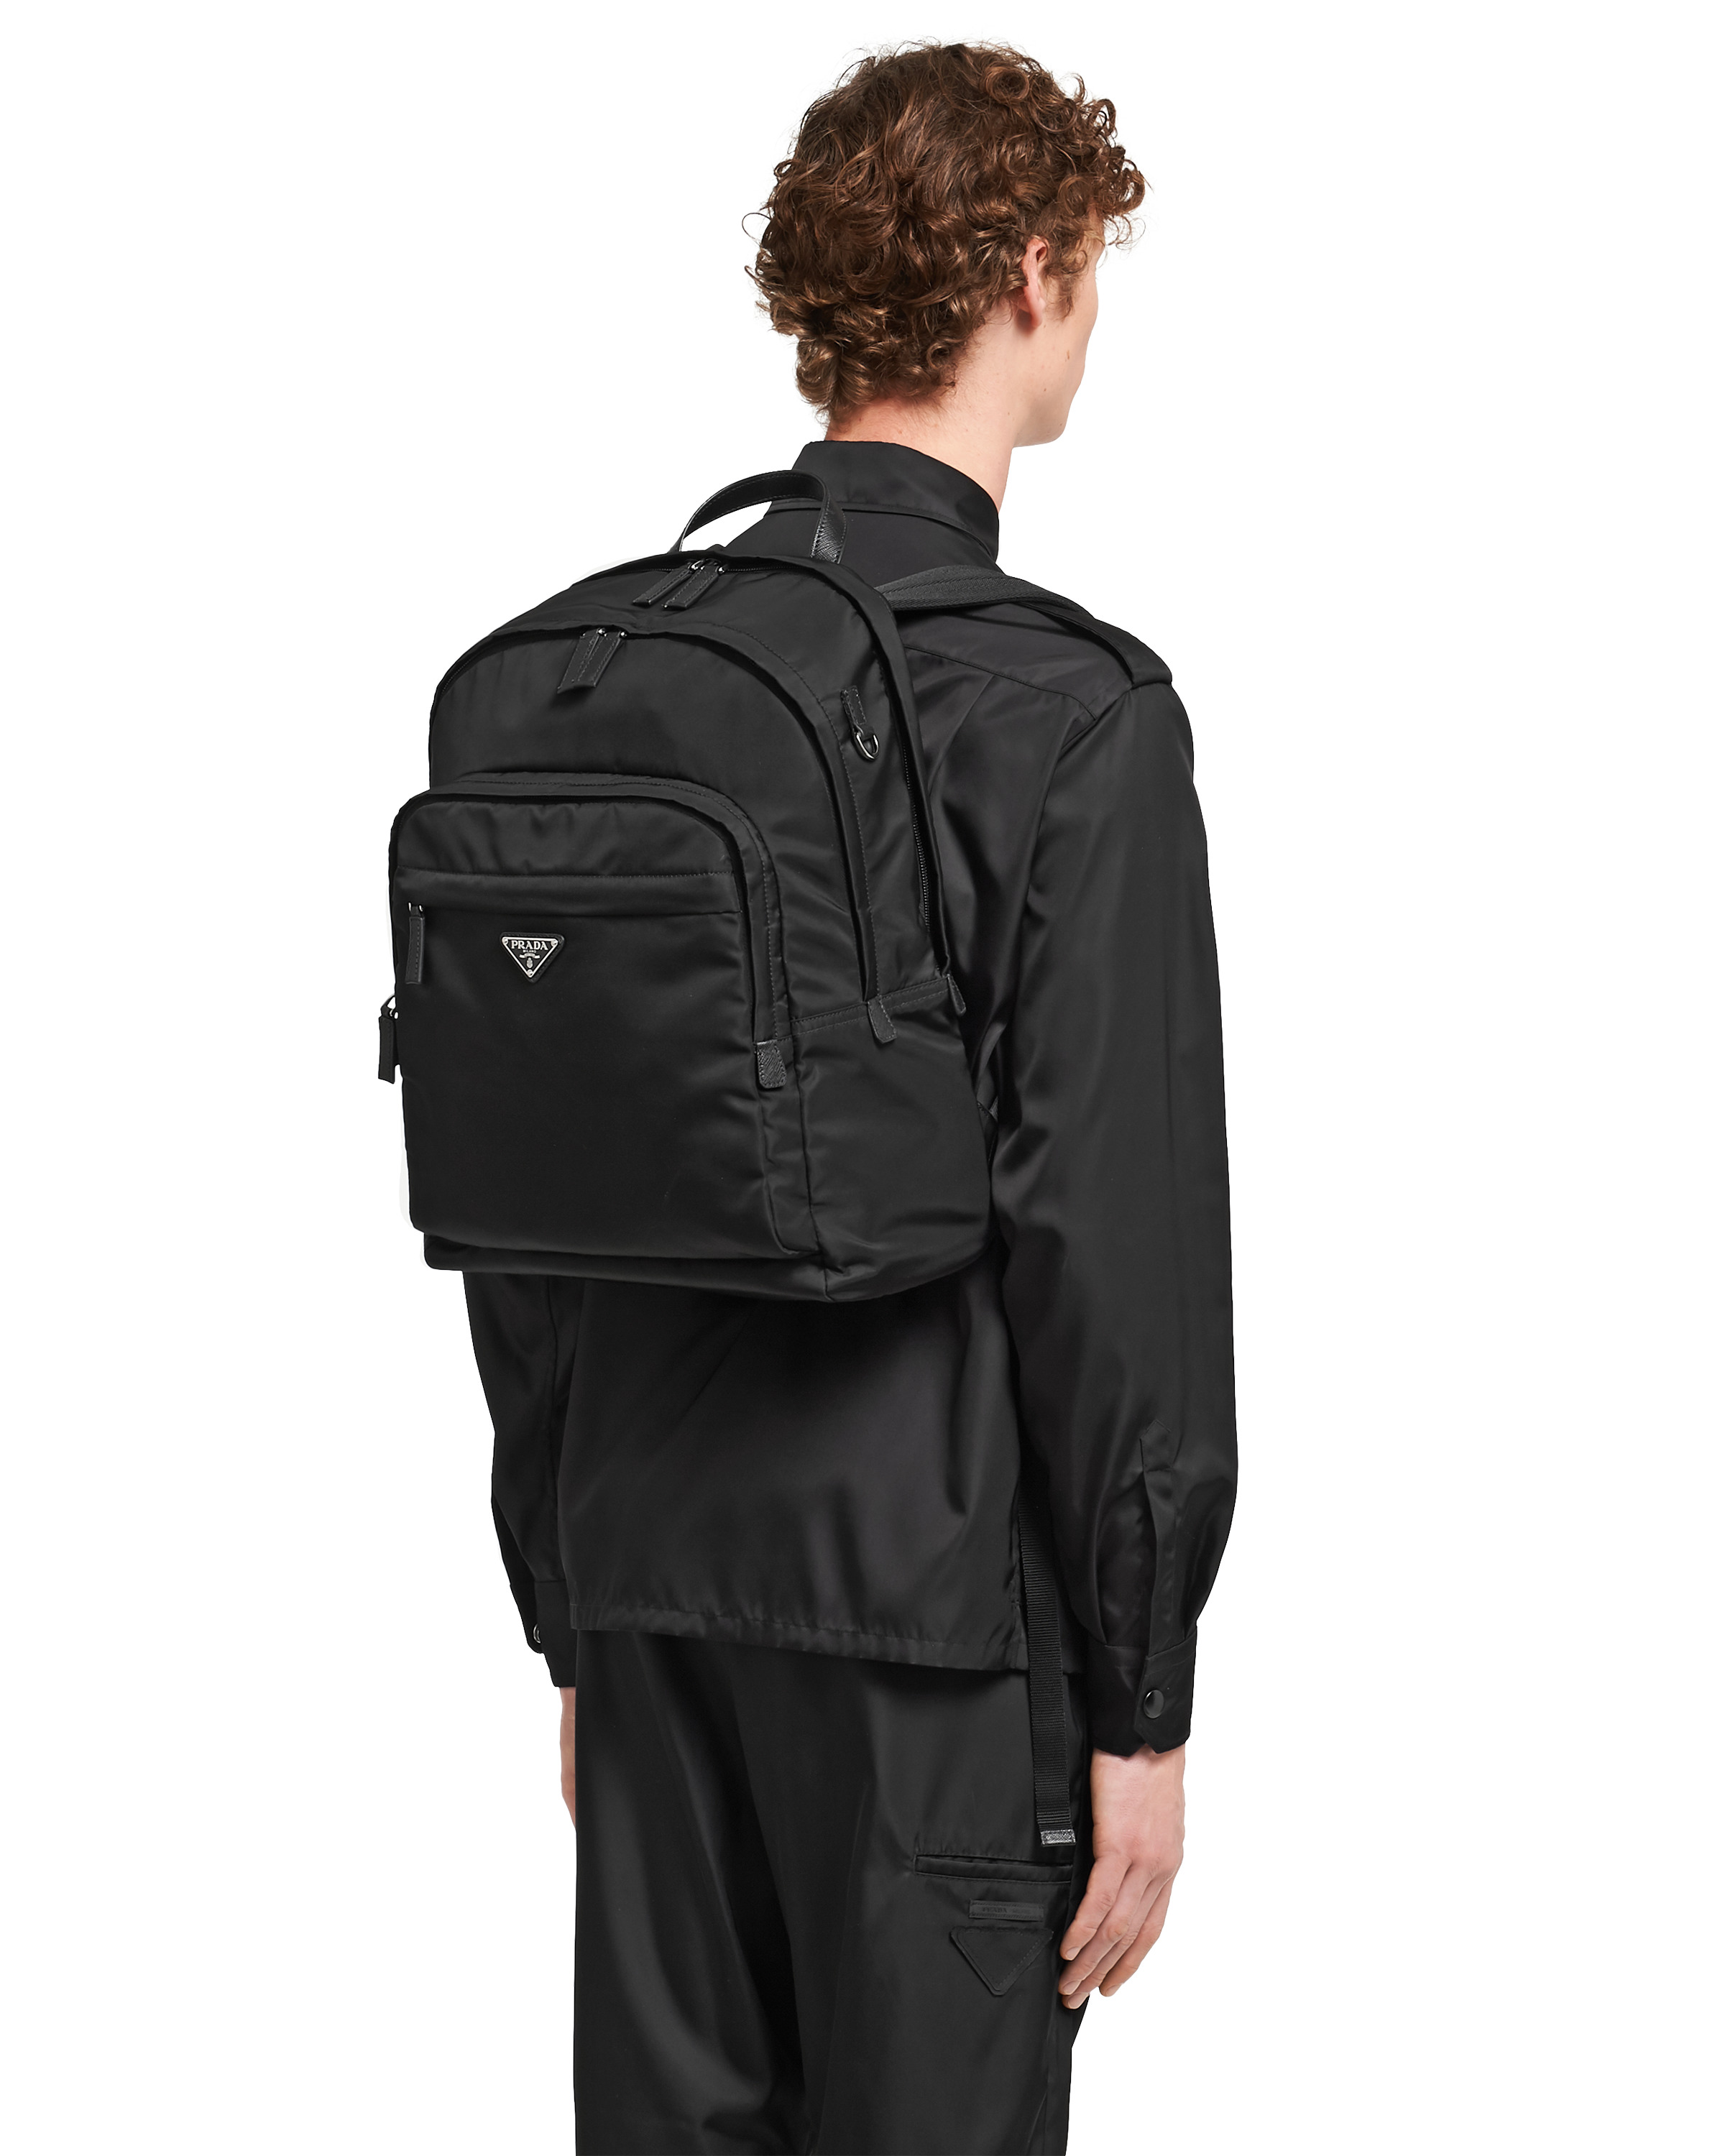 Re-Nylon and Saffiano leather backpack - 2